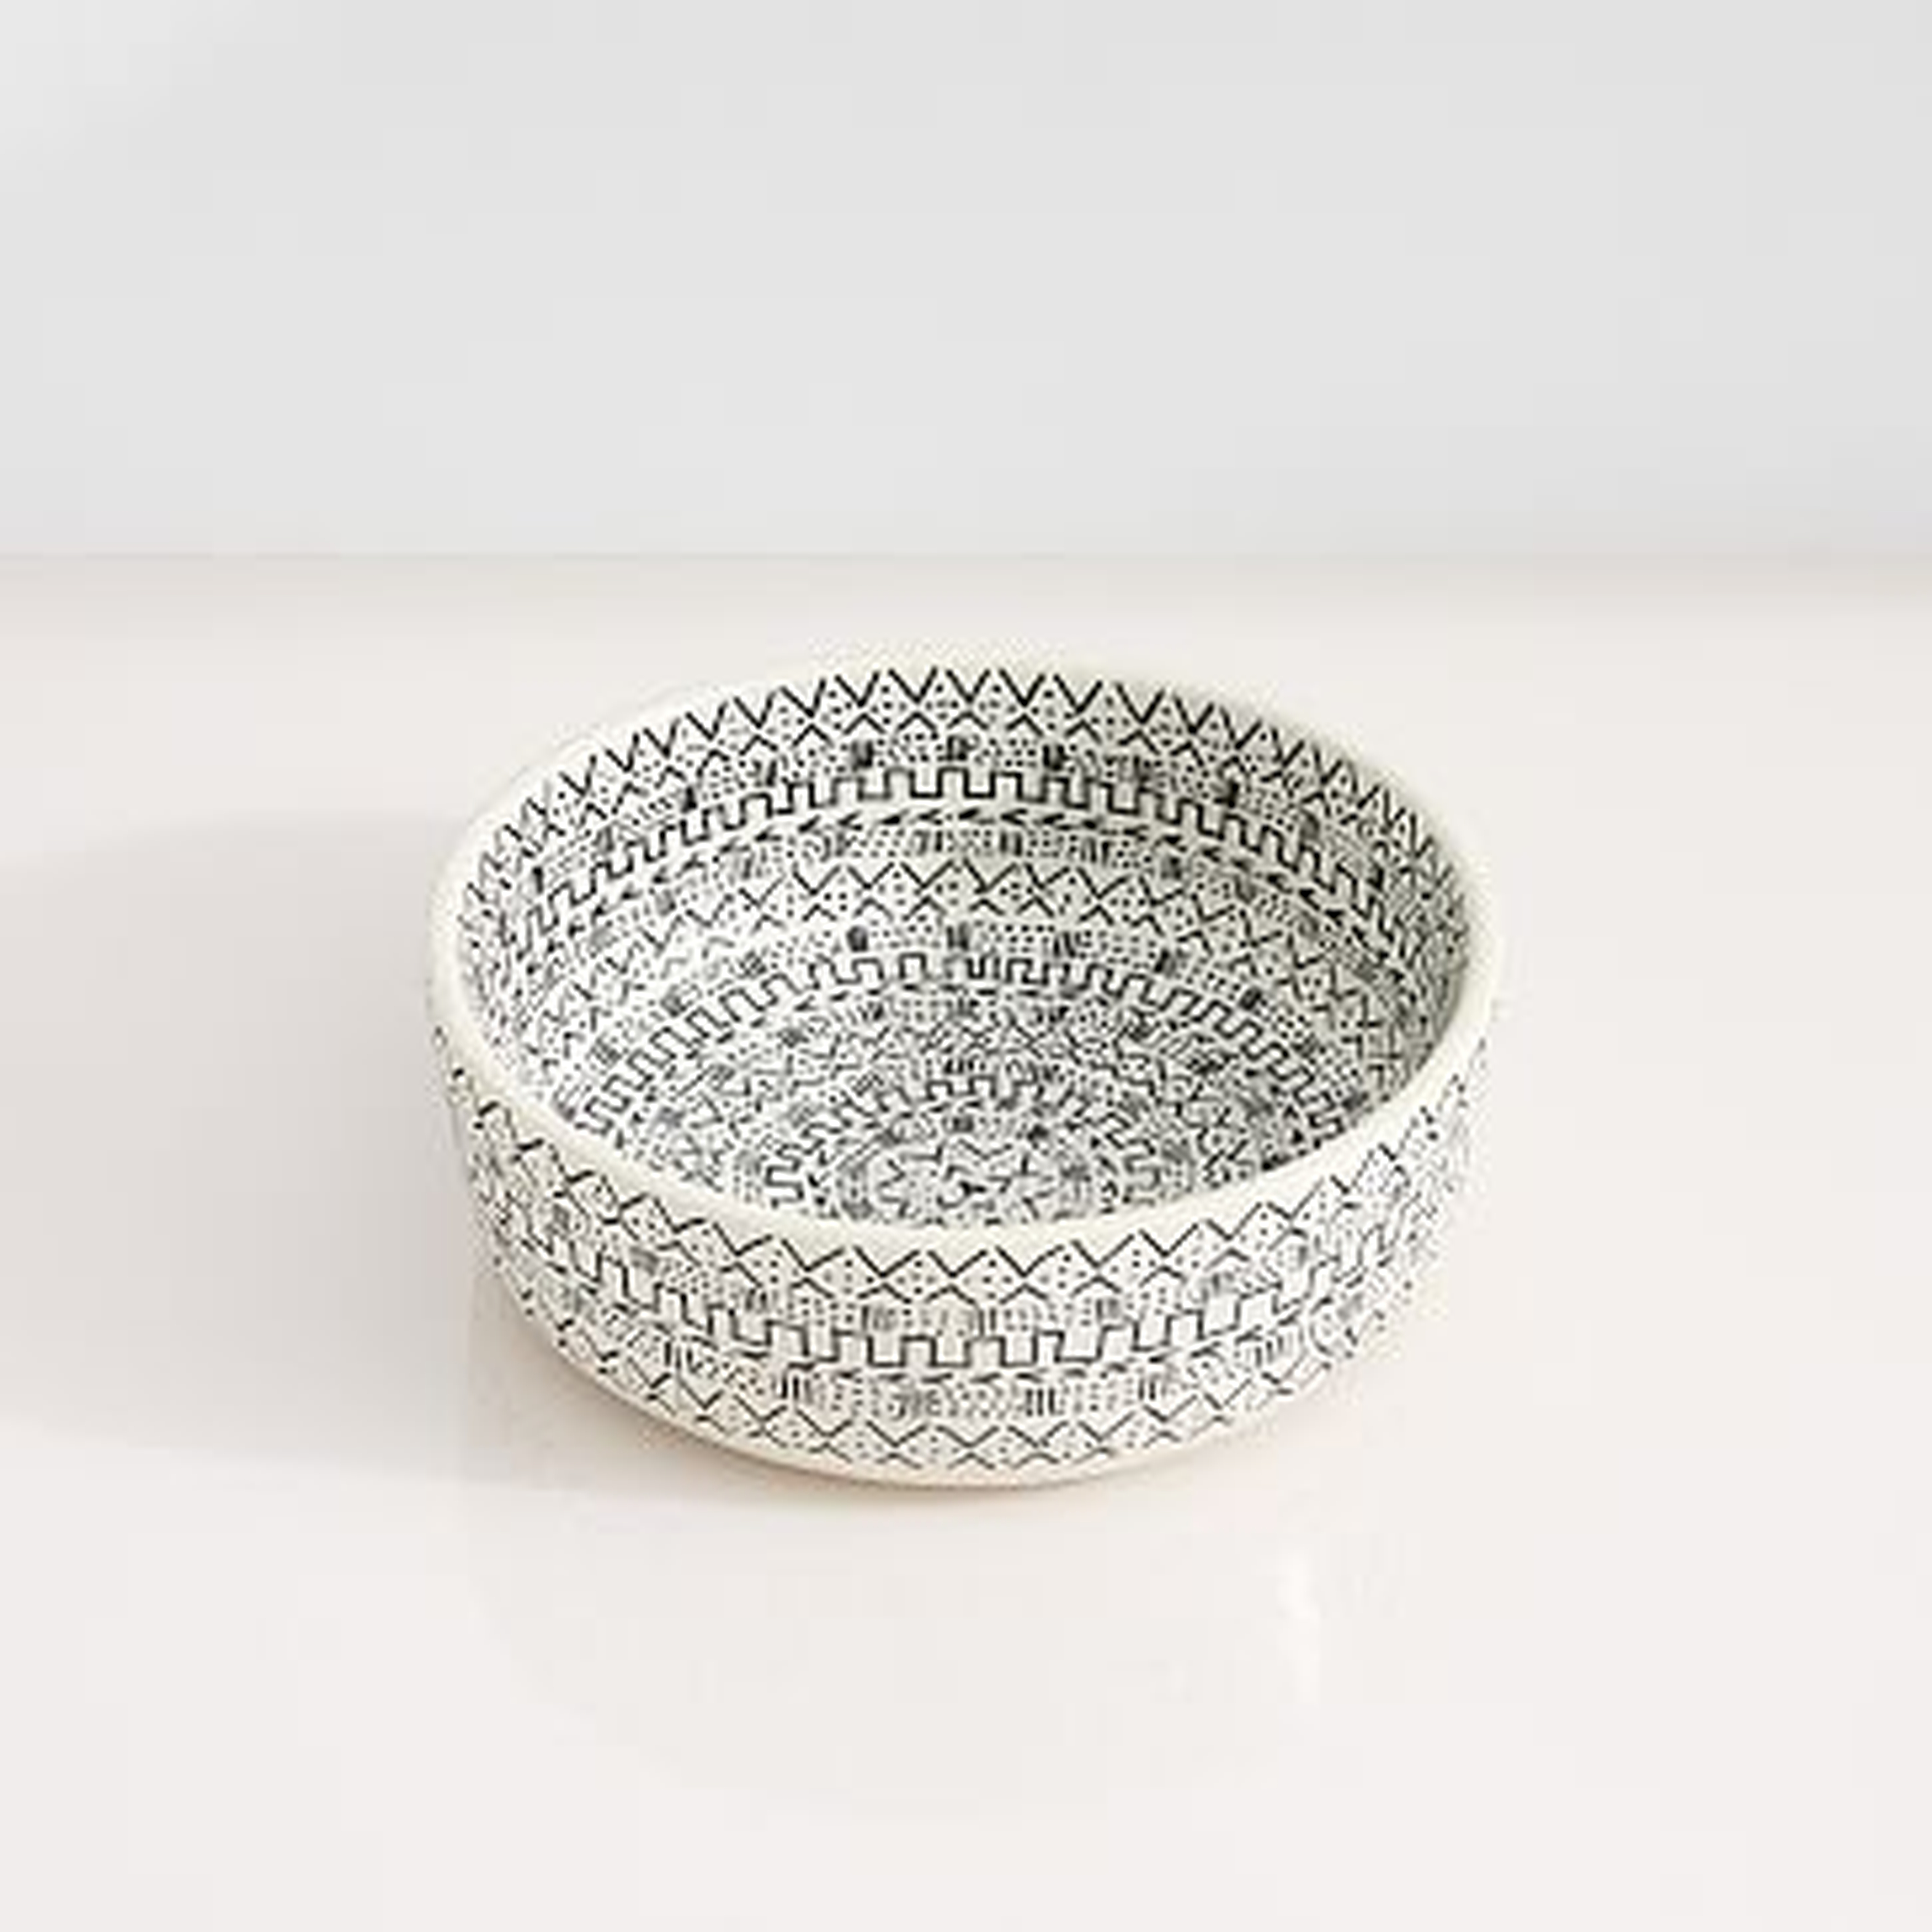 Mbare Centerpiece Bowl, White, Small - West Elm